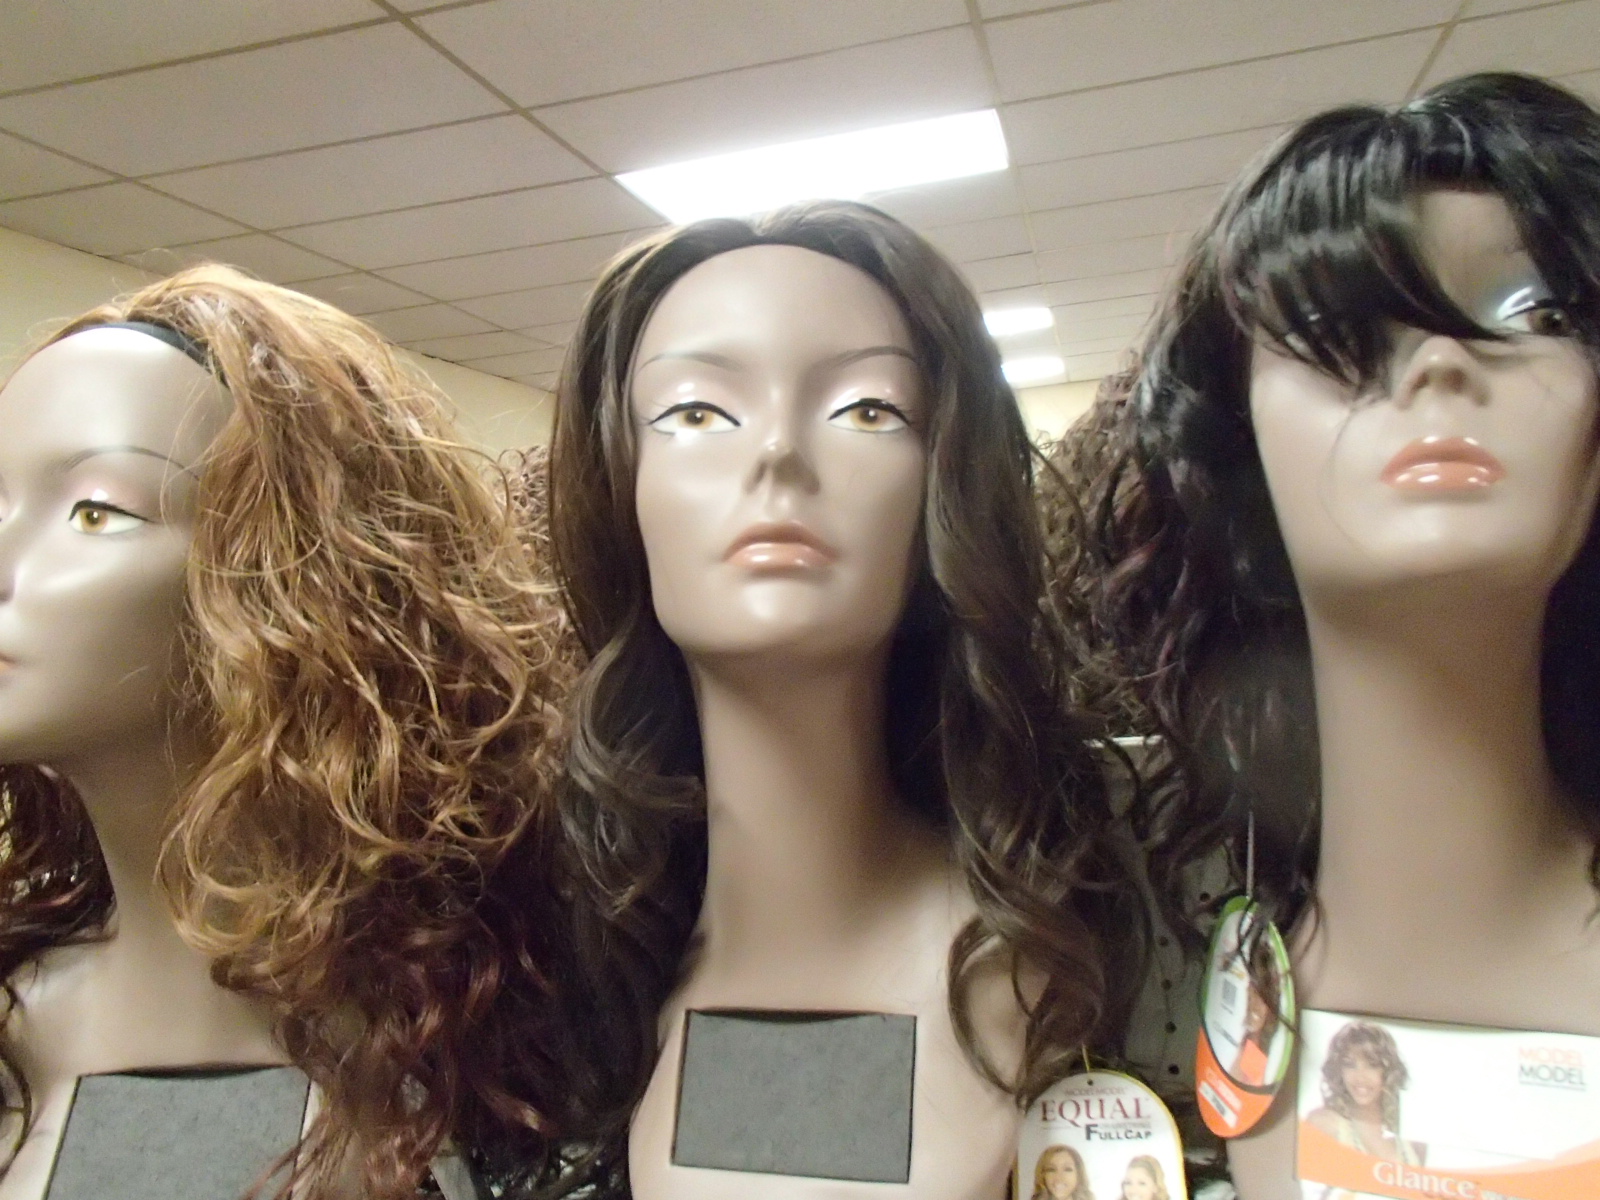 Wigs on top of fake heads.